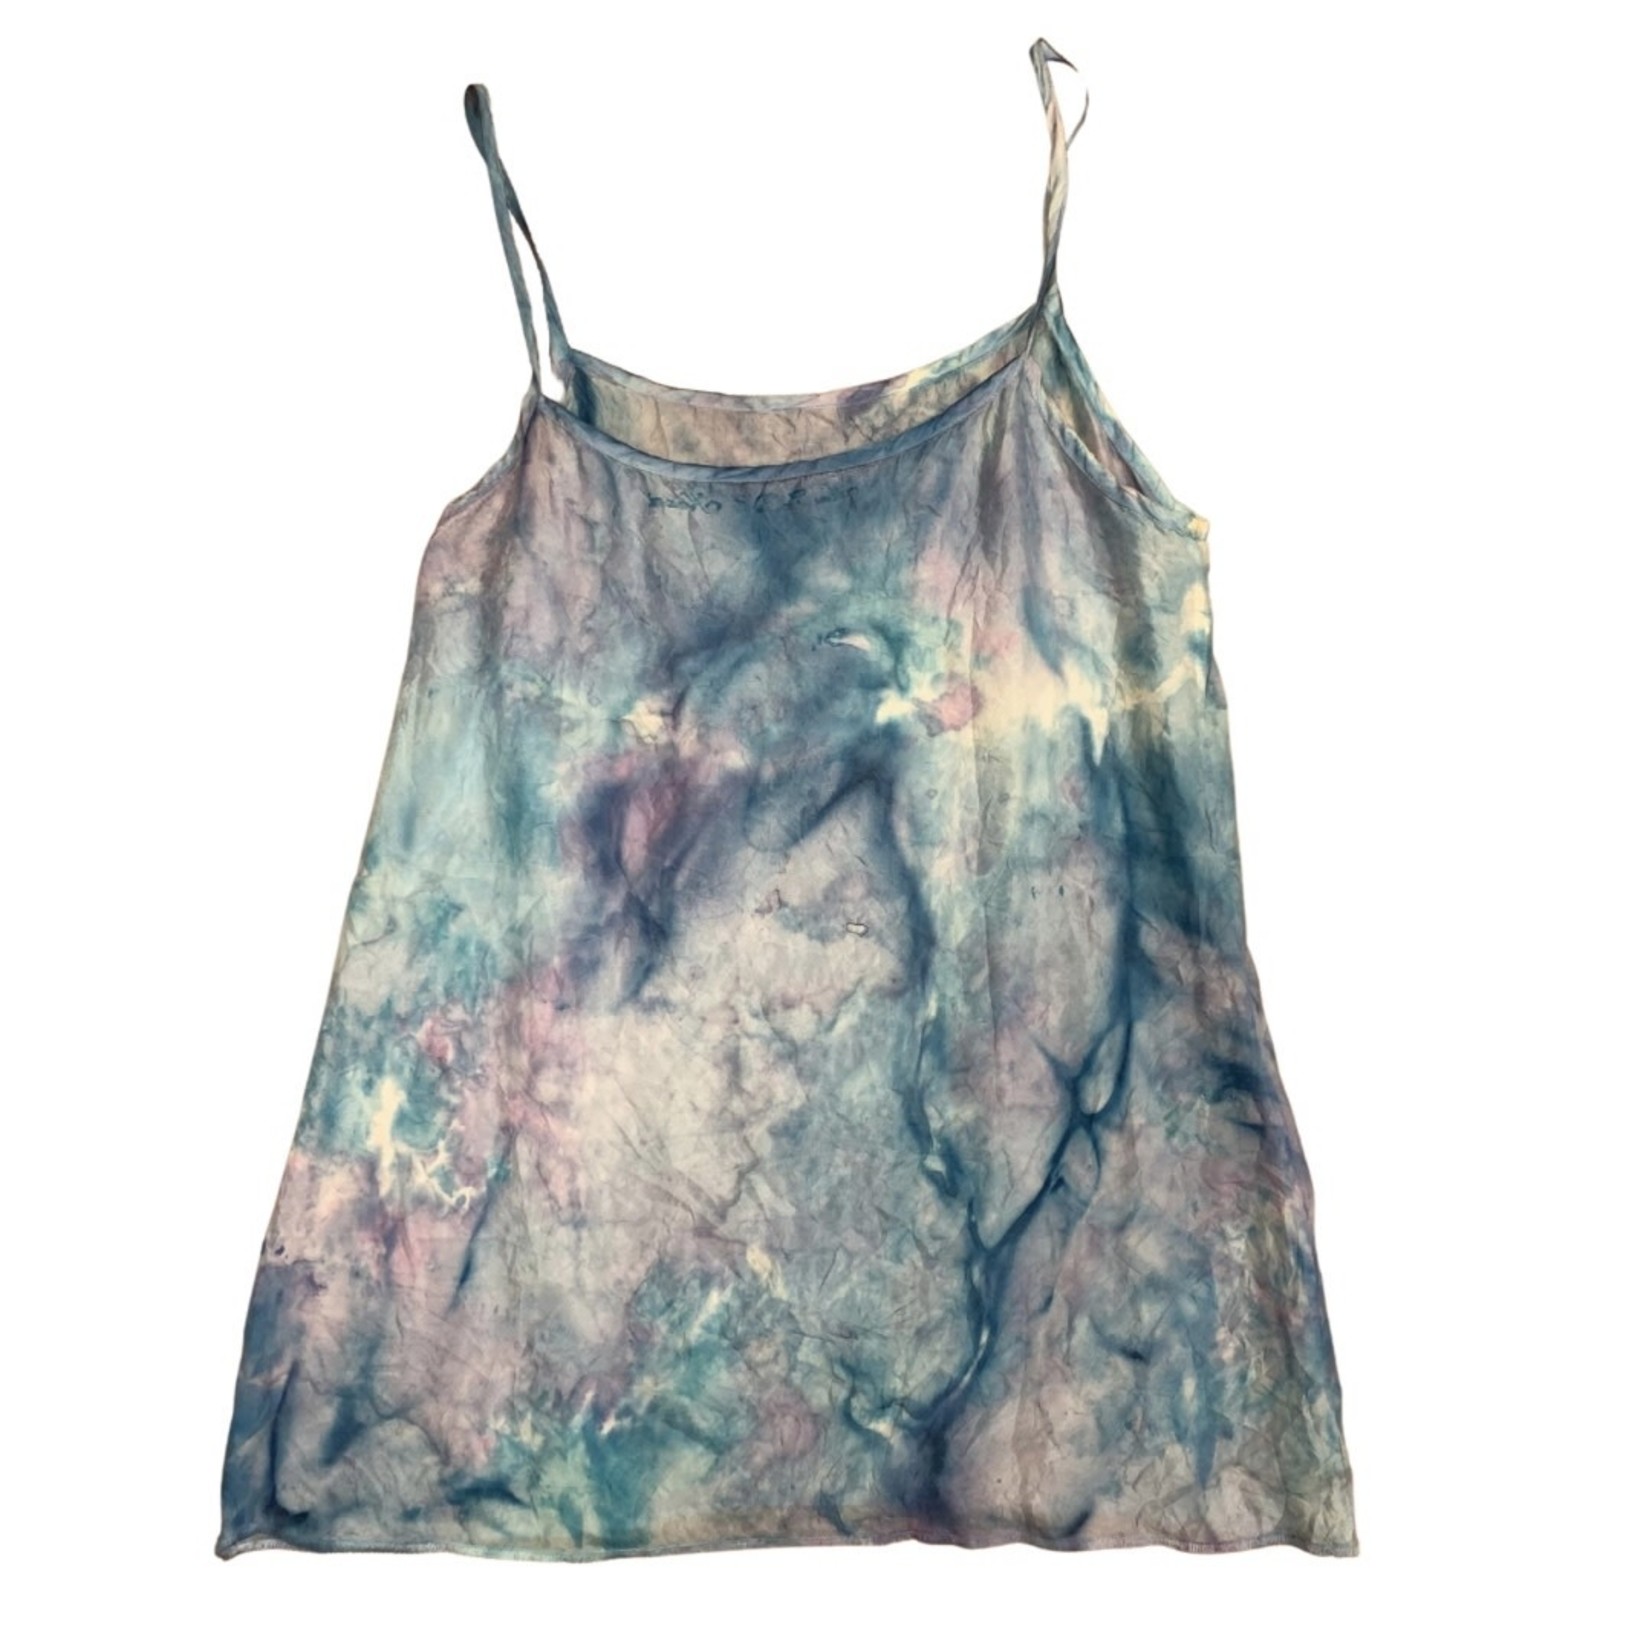 Labelle Lifewear Silk Cami Top - Hand Dye & Painted Asst. One of a Kind